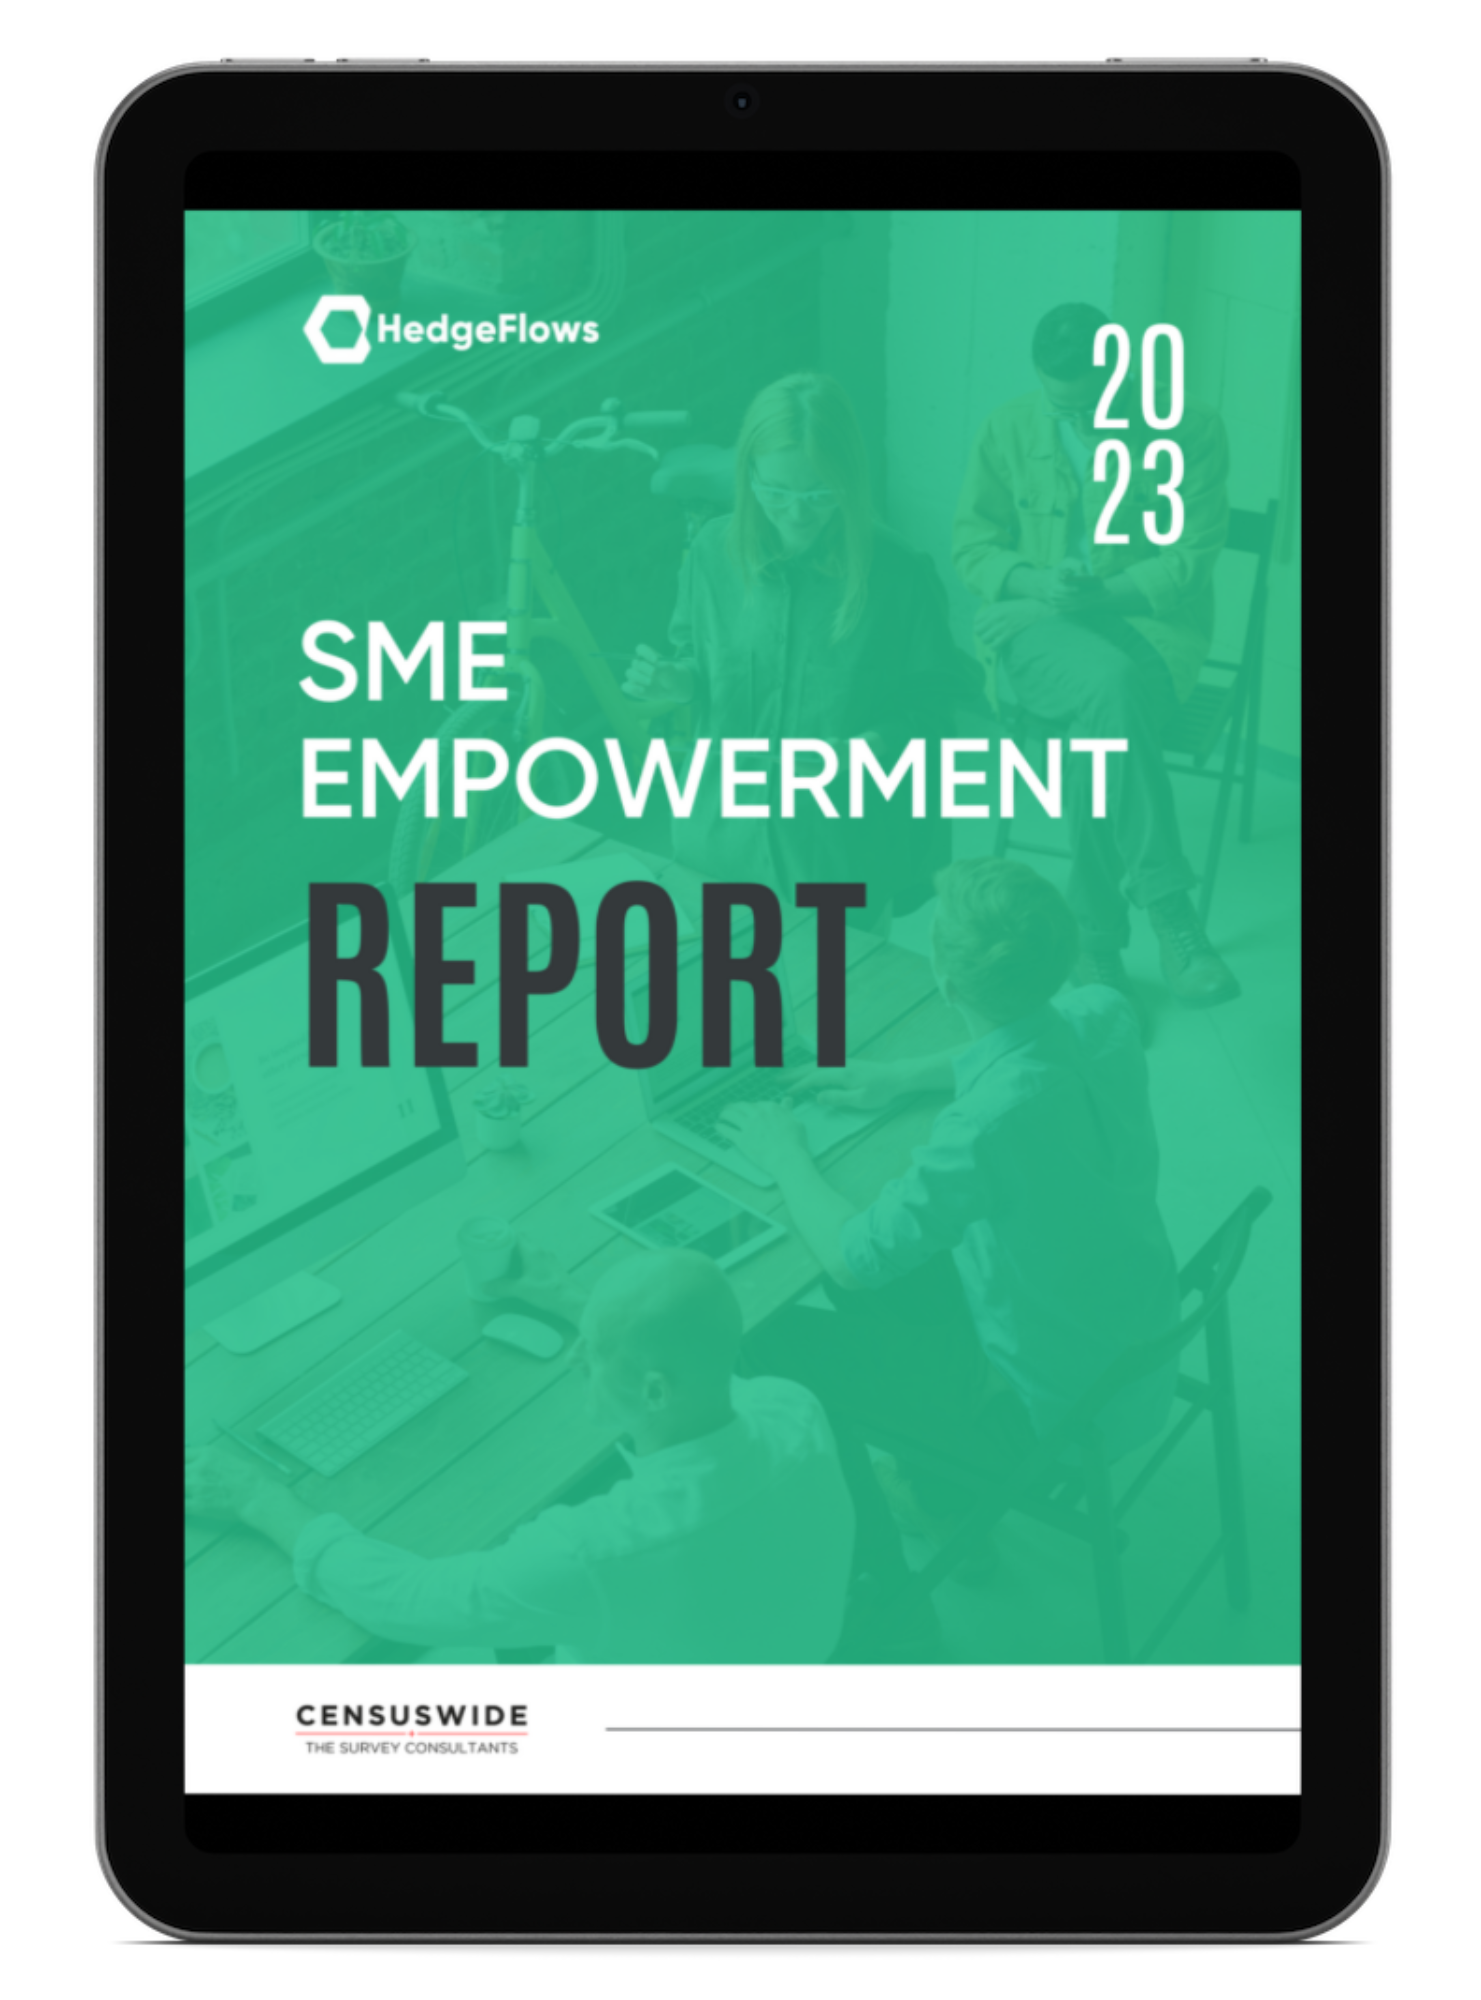 SME Empowerment Report front